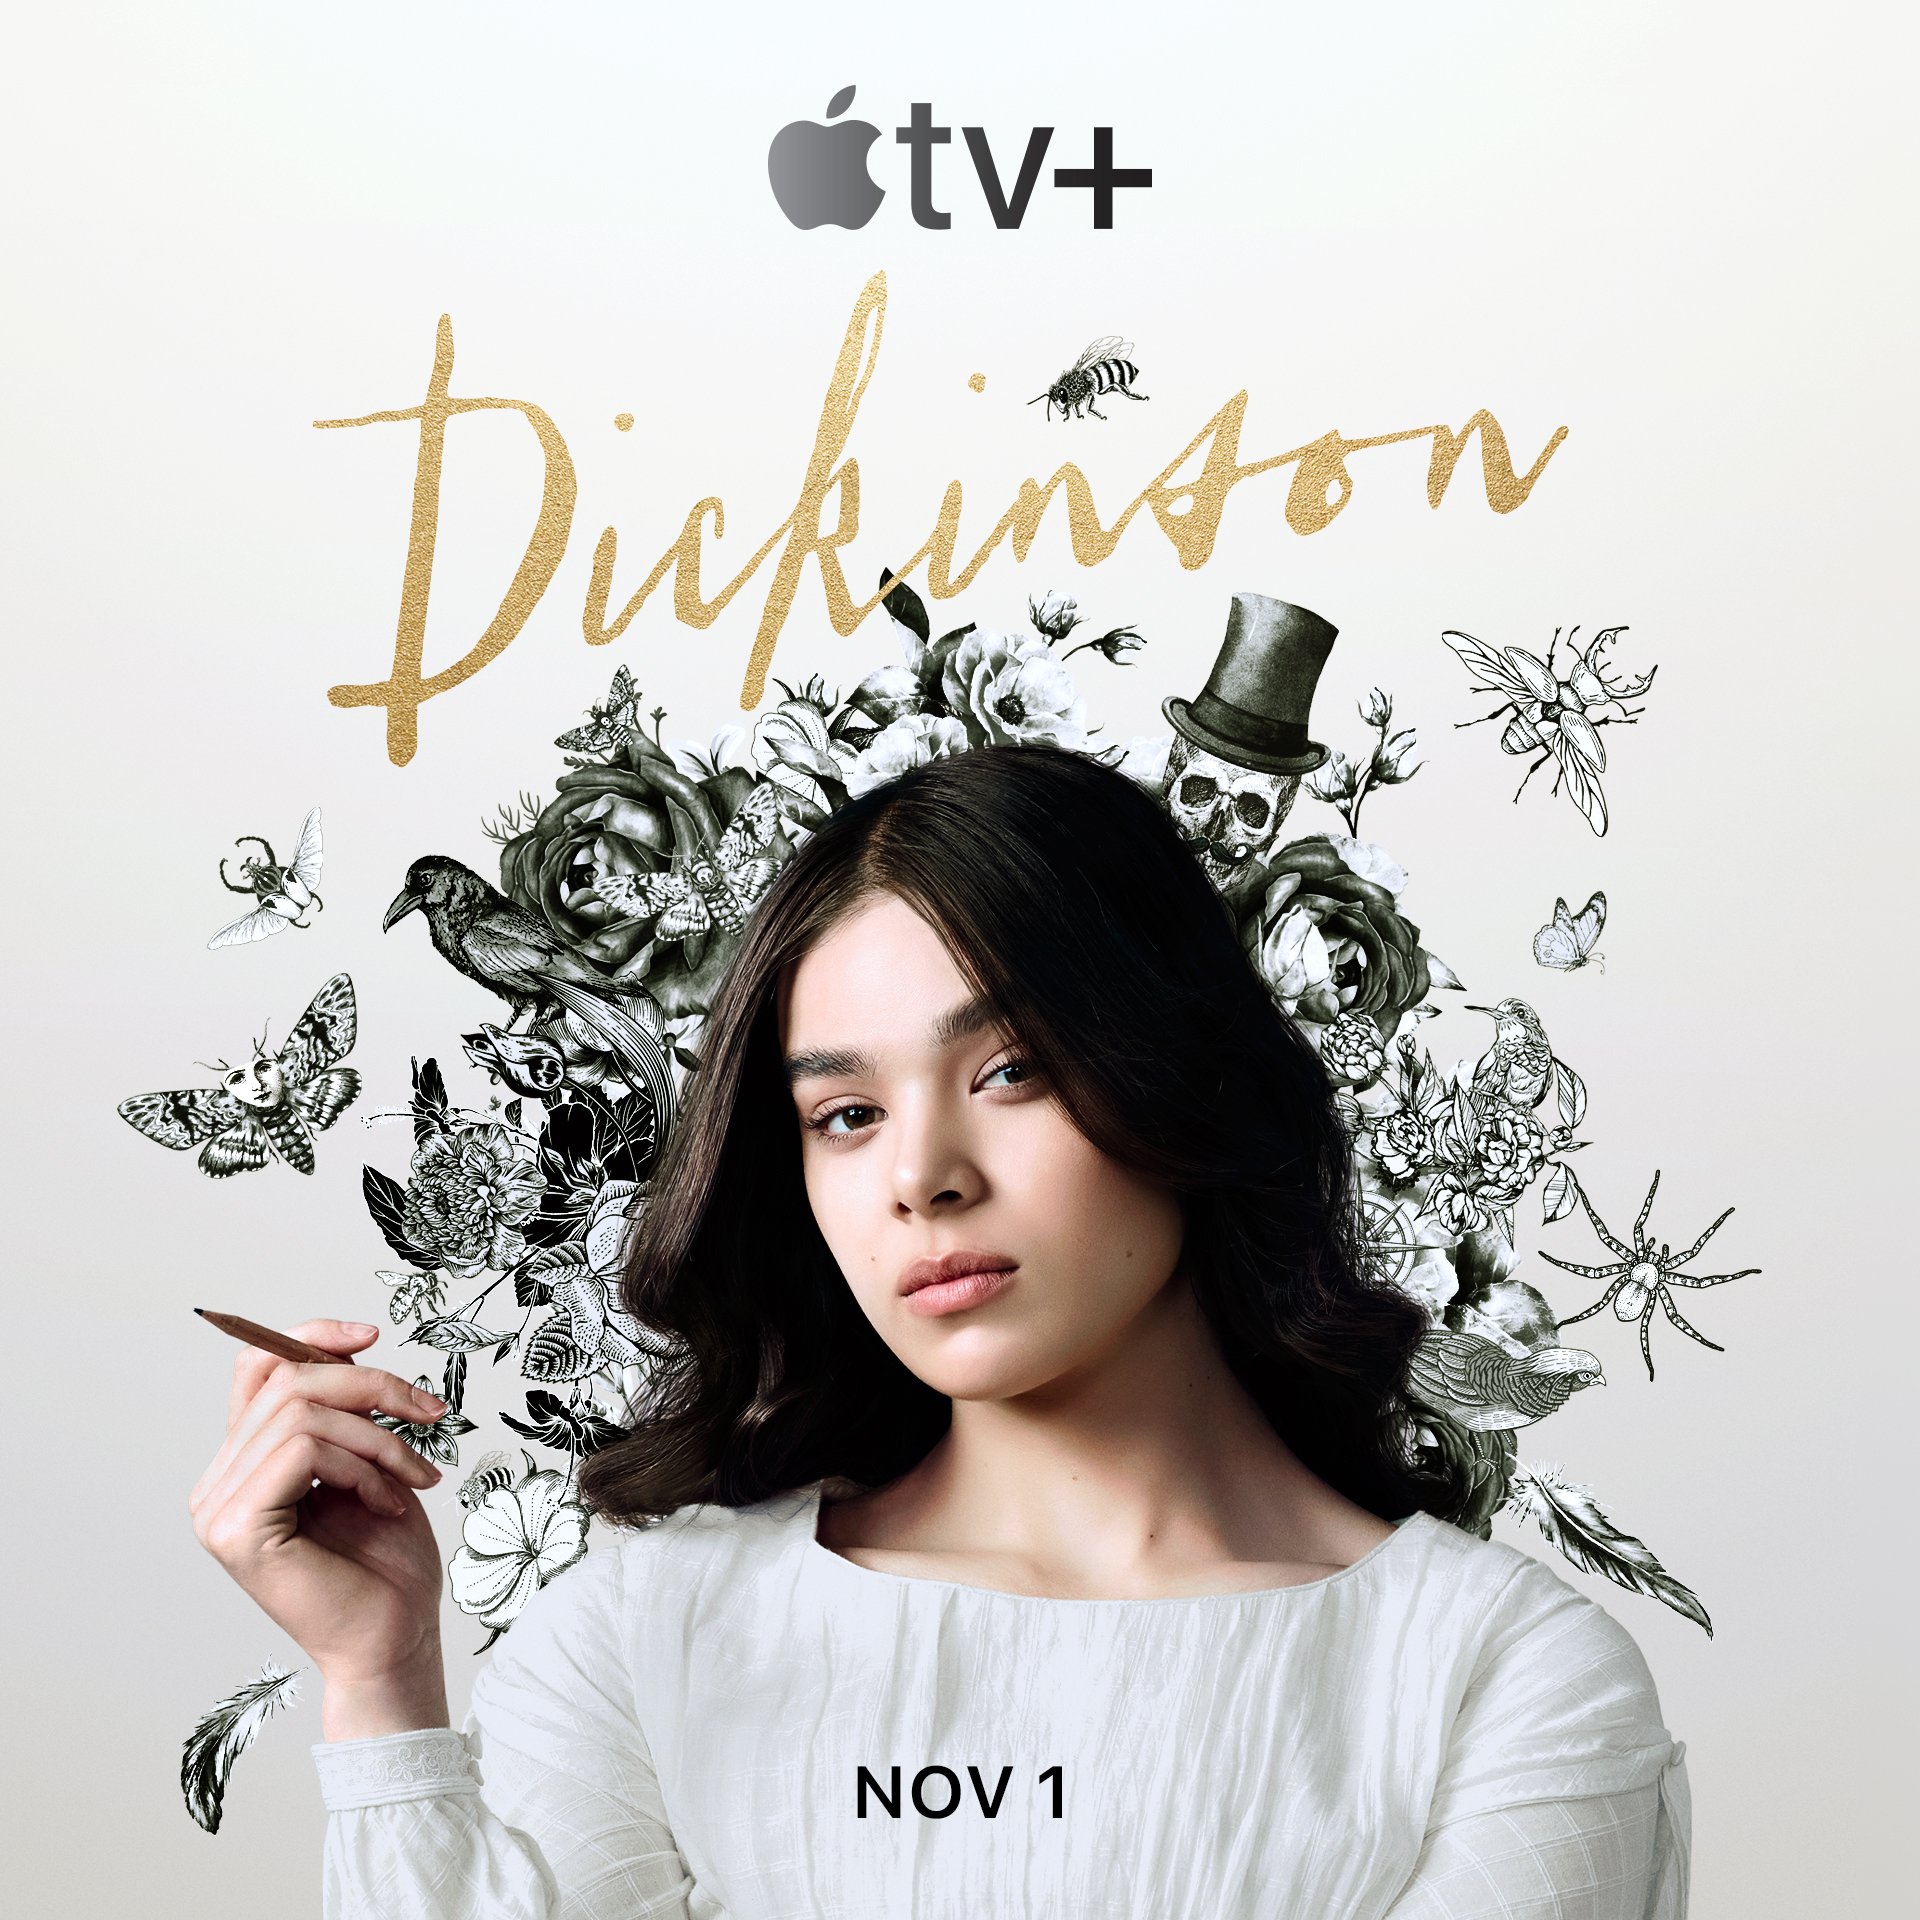 Apple TV on Twitter: "Mark calendar for November 1—you've got shows to watch on Apple TV+. Available on the Apple TV app with an Apple TV+ subscription. https://t.co/gJciFMEShI" / Twitter